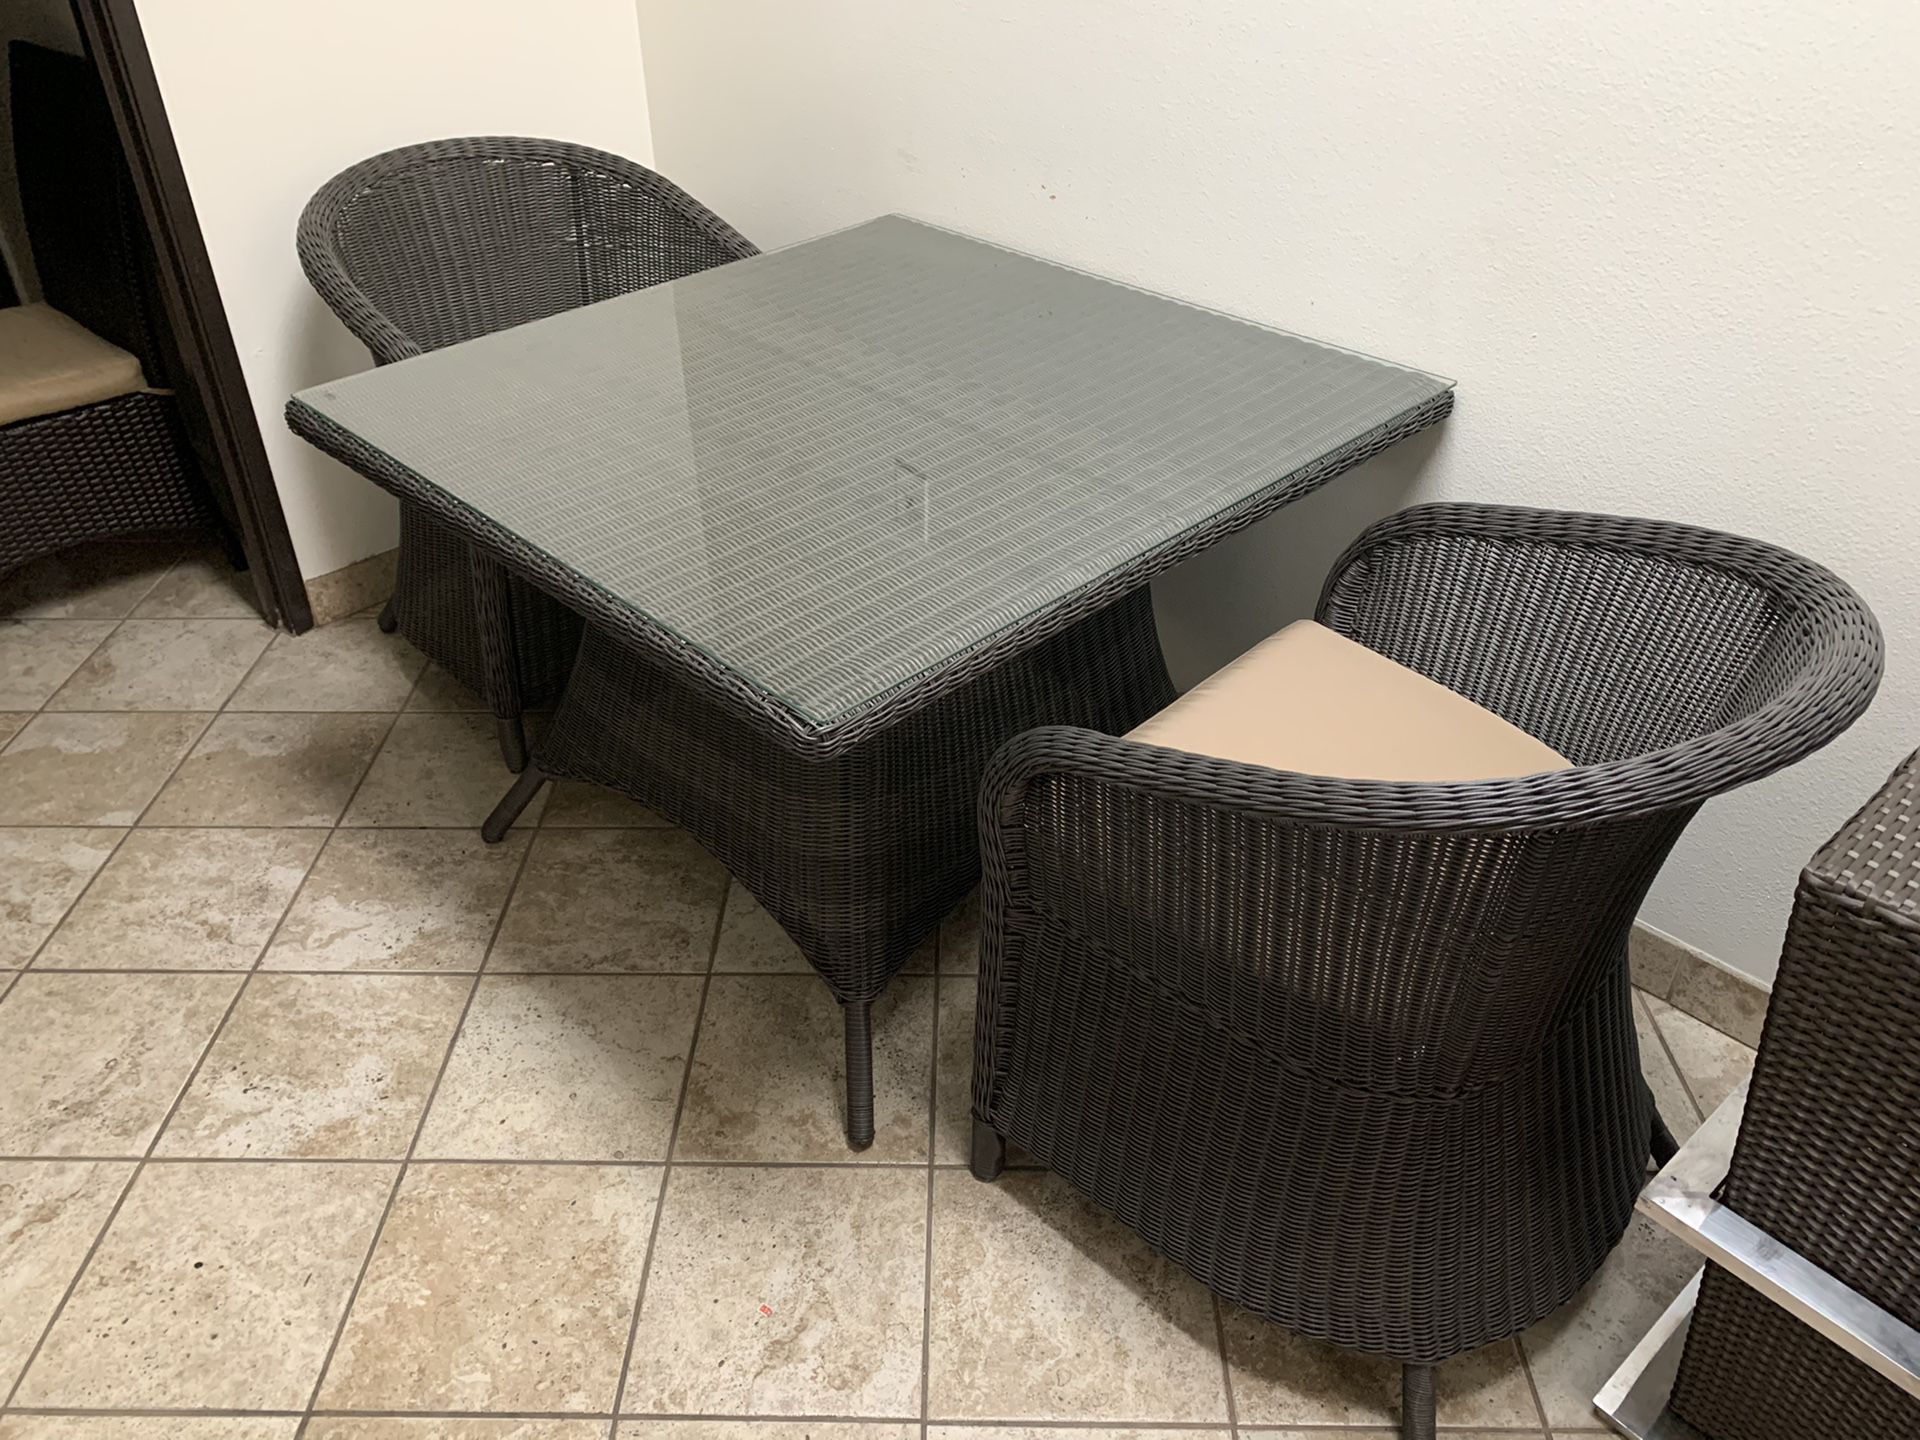 patio furniture 1 table with 2 chairs 299$ or 1 table with 4 chairs 499$